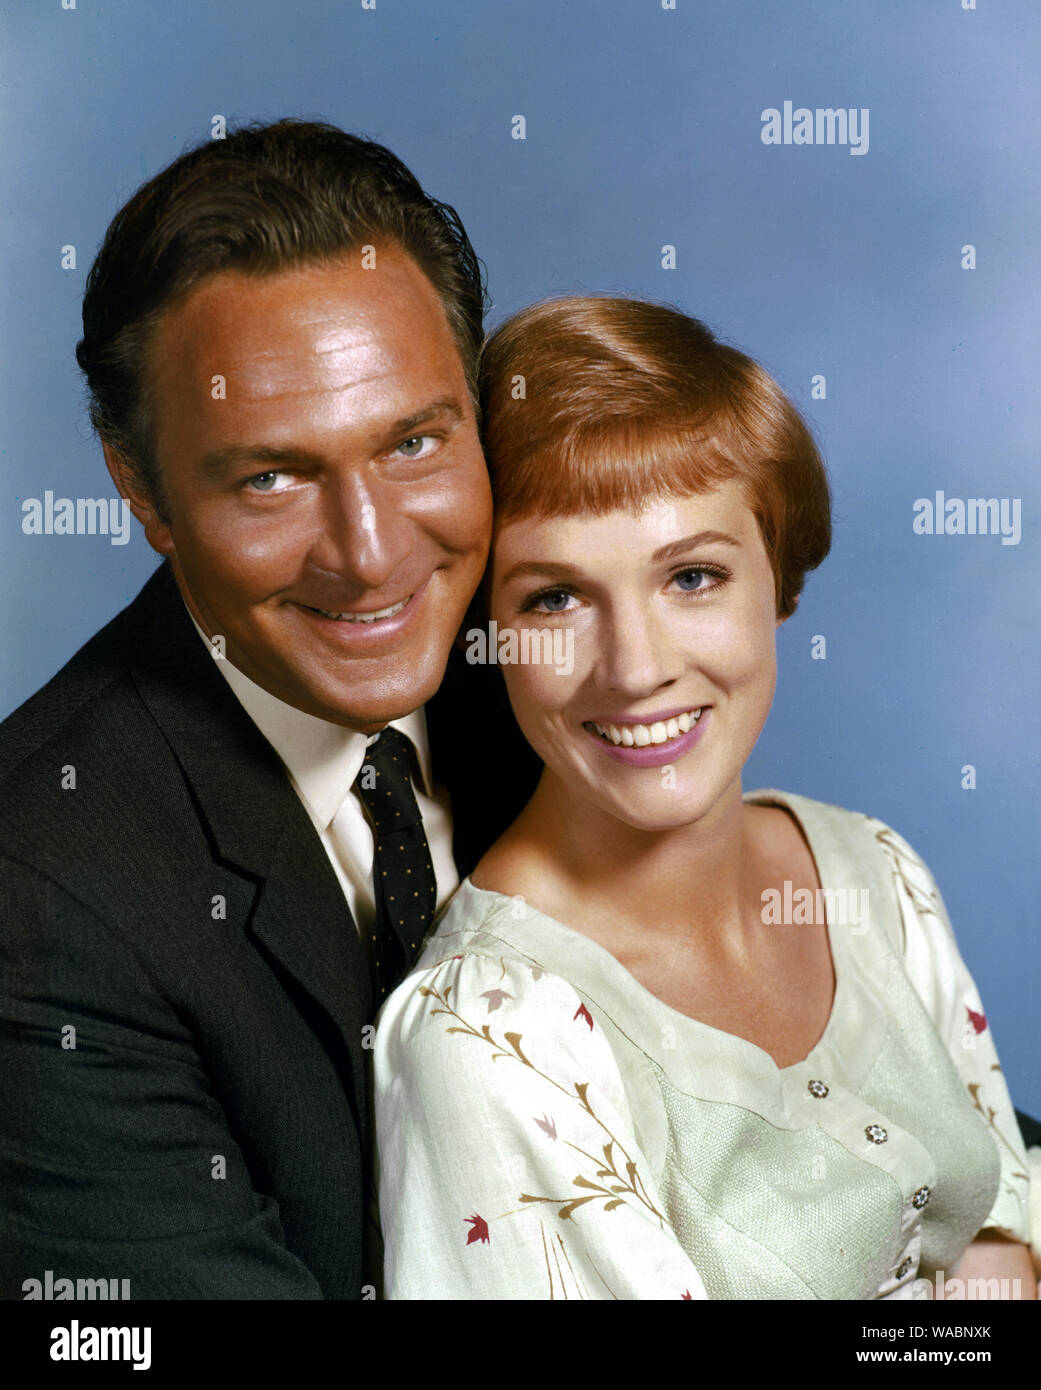 Christopher Plummer, Julie Andrews, 'The Sound of Music' (1965) 20th Century Fox   File Reference # 33848-316THA Stock Photo